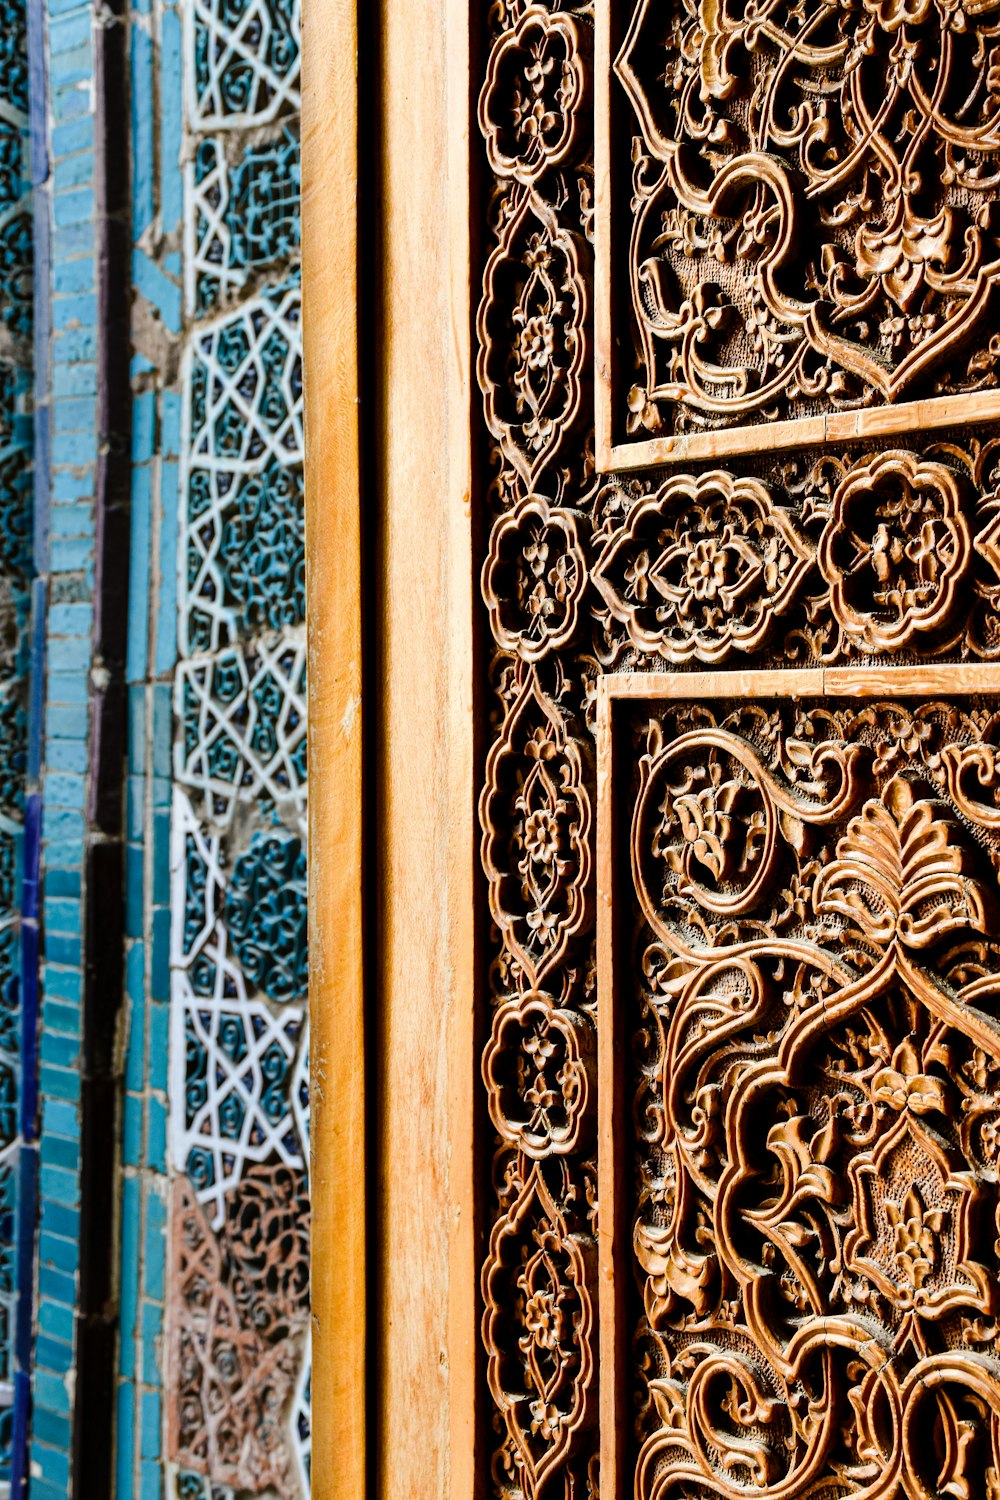 a close up of a wooden door with intricate carvings